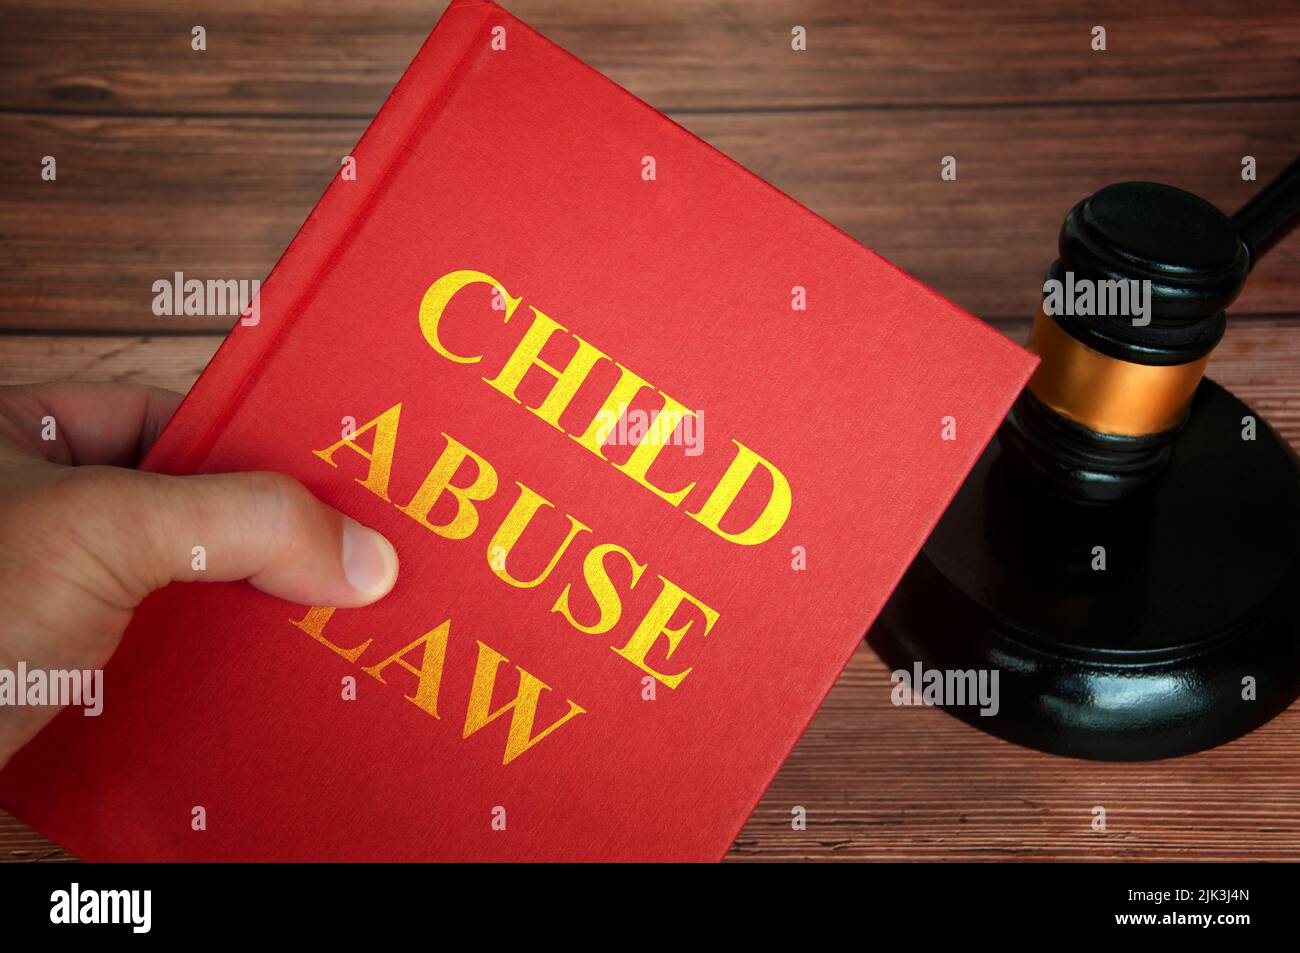 Child abuse law text on law book with judge gavel on wooden desk background. Law concept Stock Photo